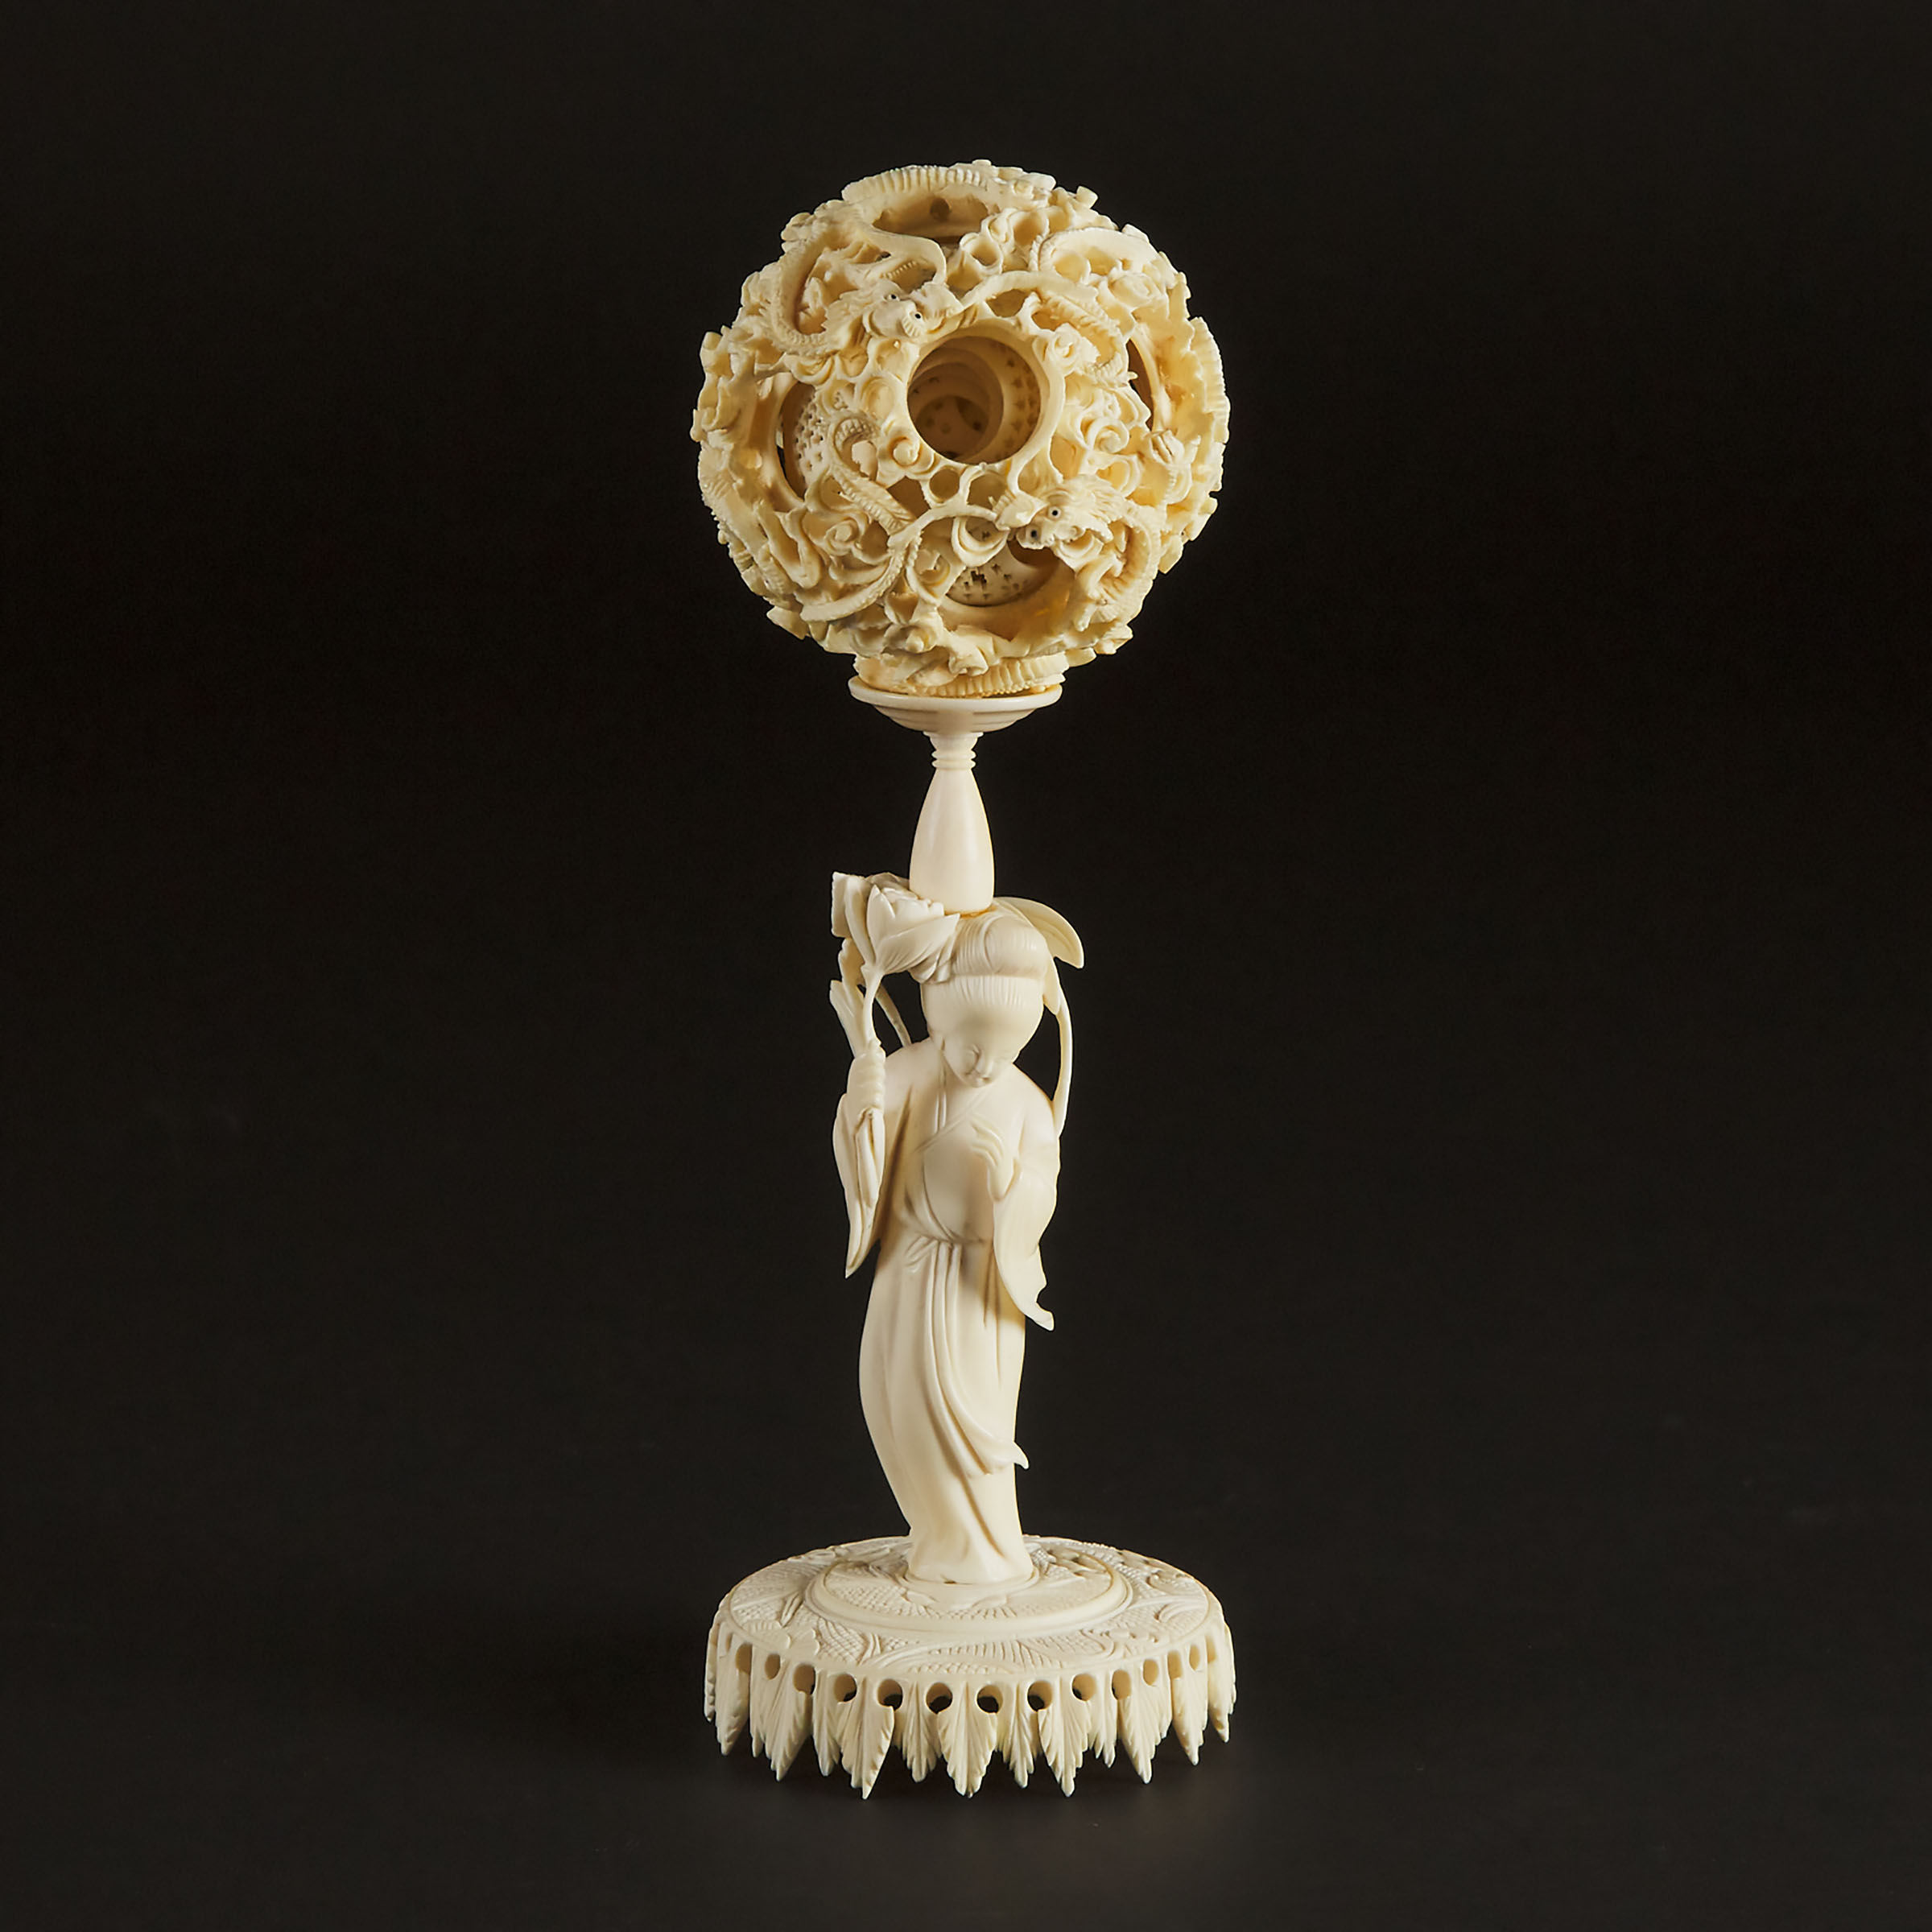 A Chinese Ivory Puzzle Ball and Stand, Circa 1900